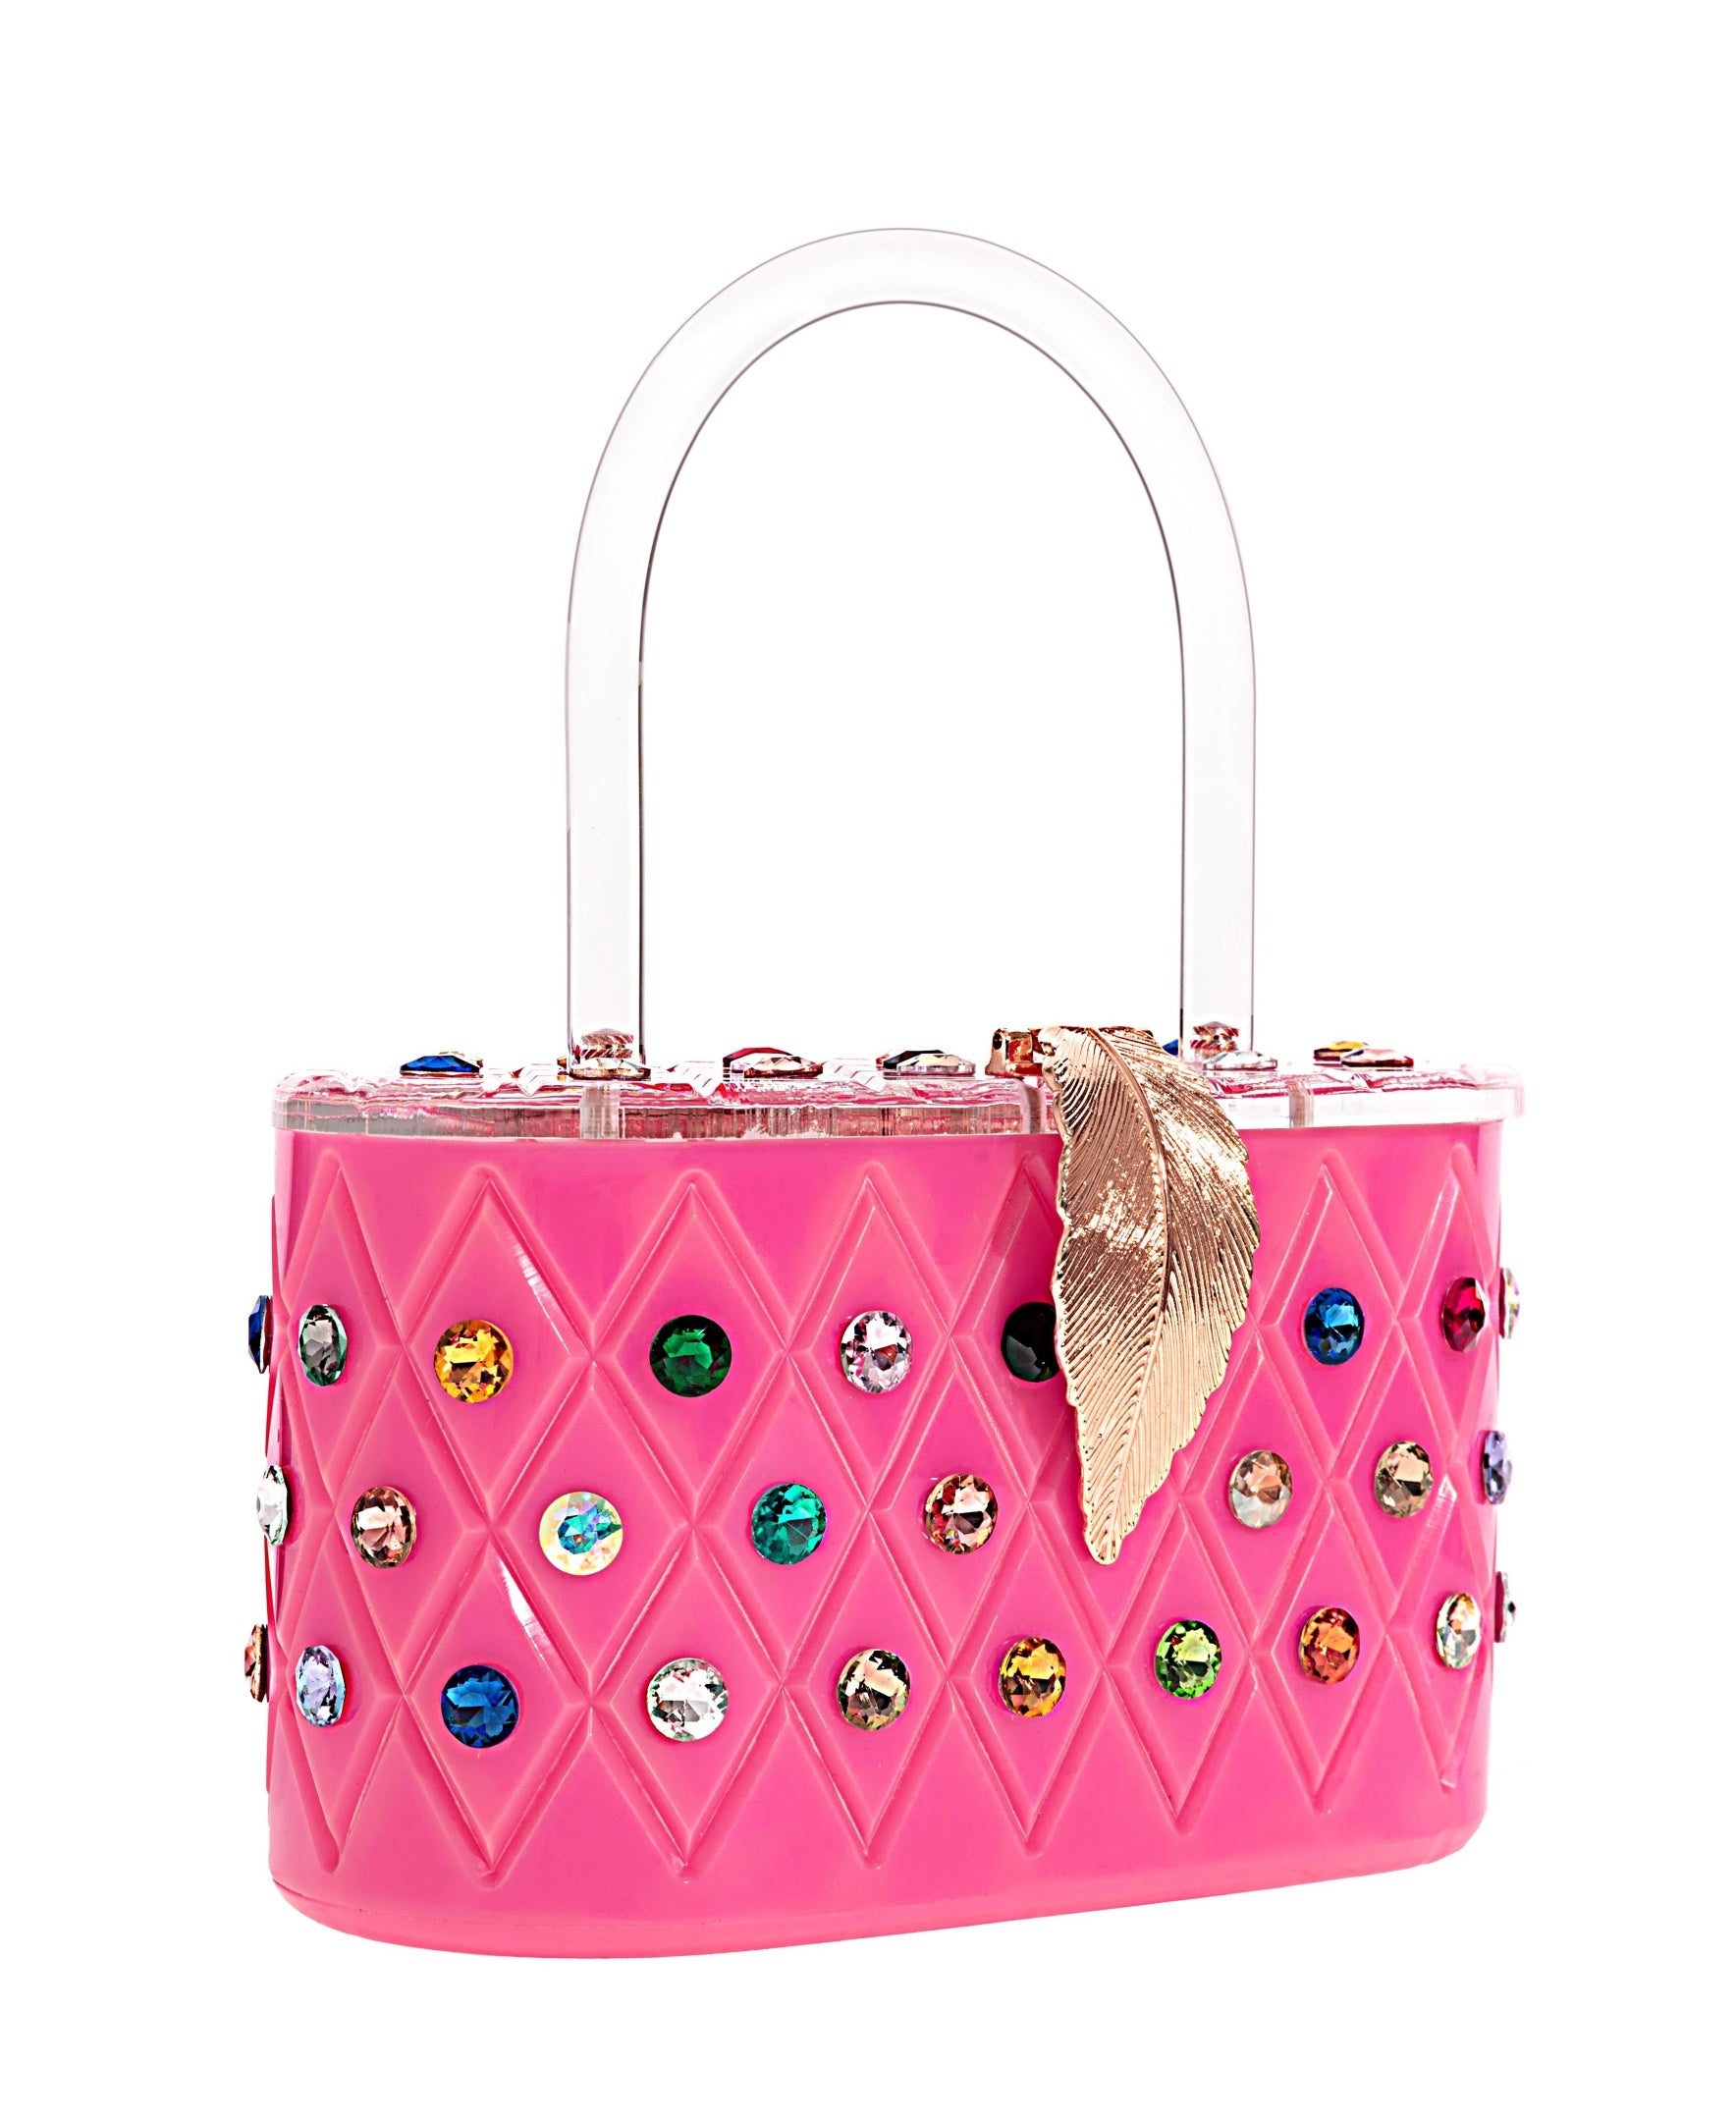 Pink Box Clutch Bag with Gold Chain Strap | Mini Colourful Handbags For Any Occasion